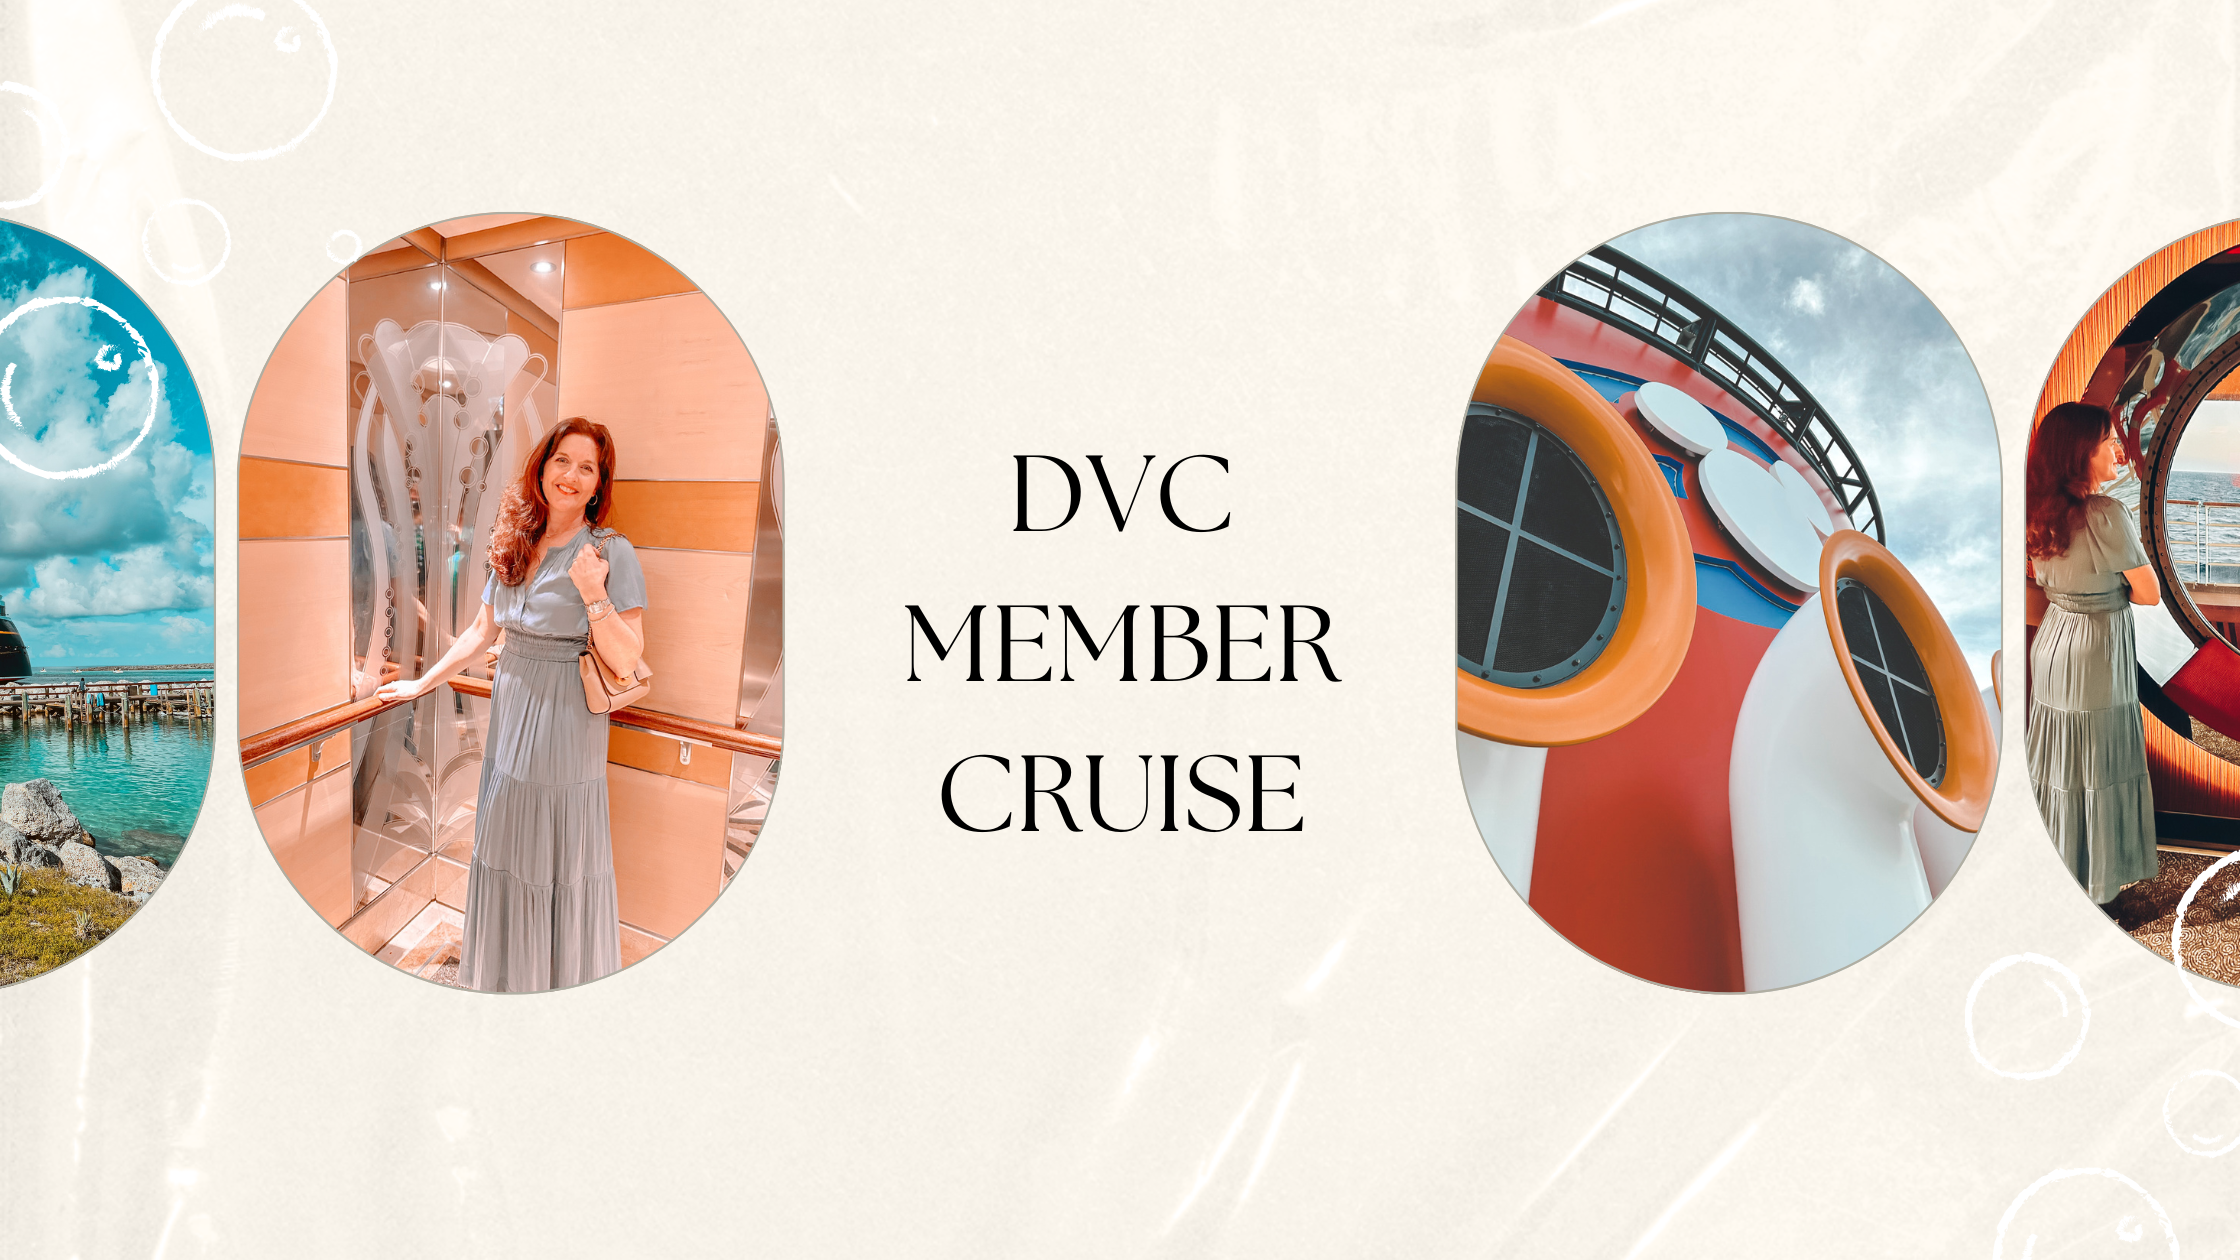 Travel Day, The Riviera Resort, and DVC Member Cruise